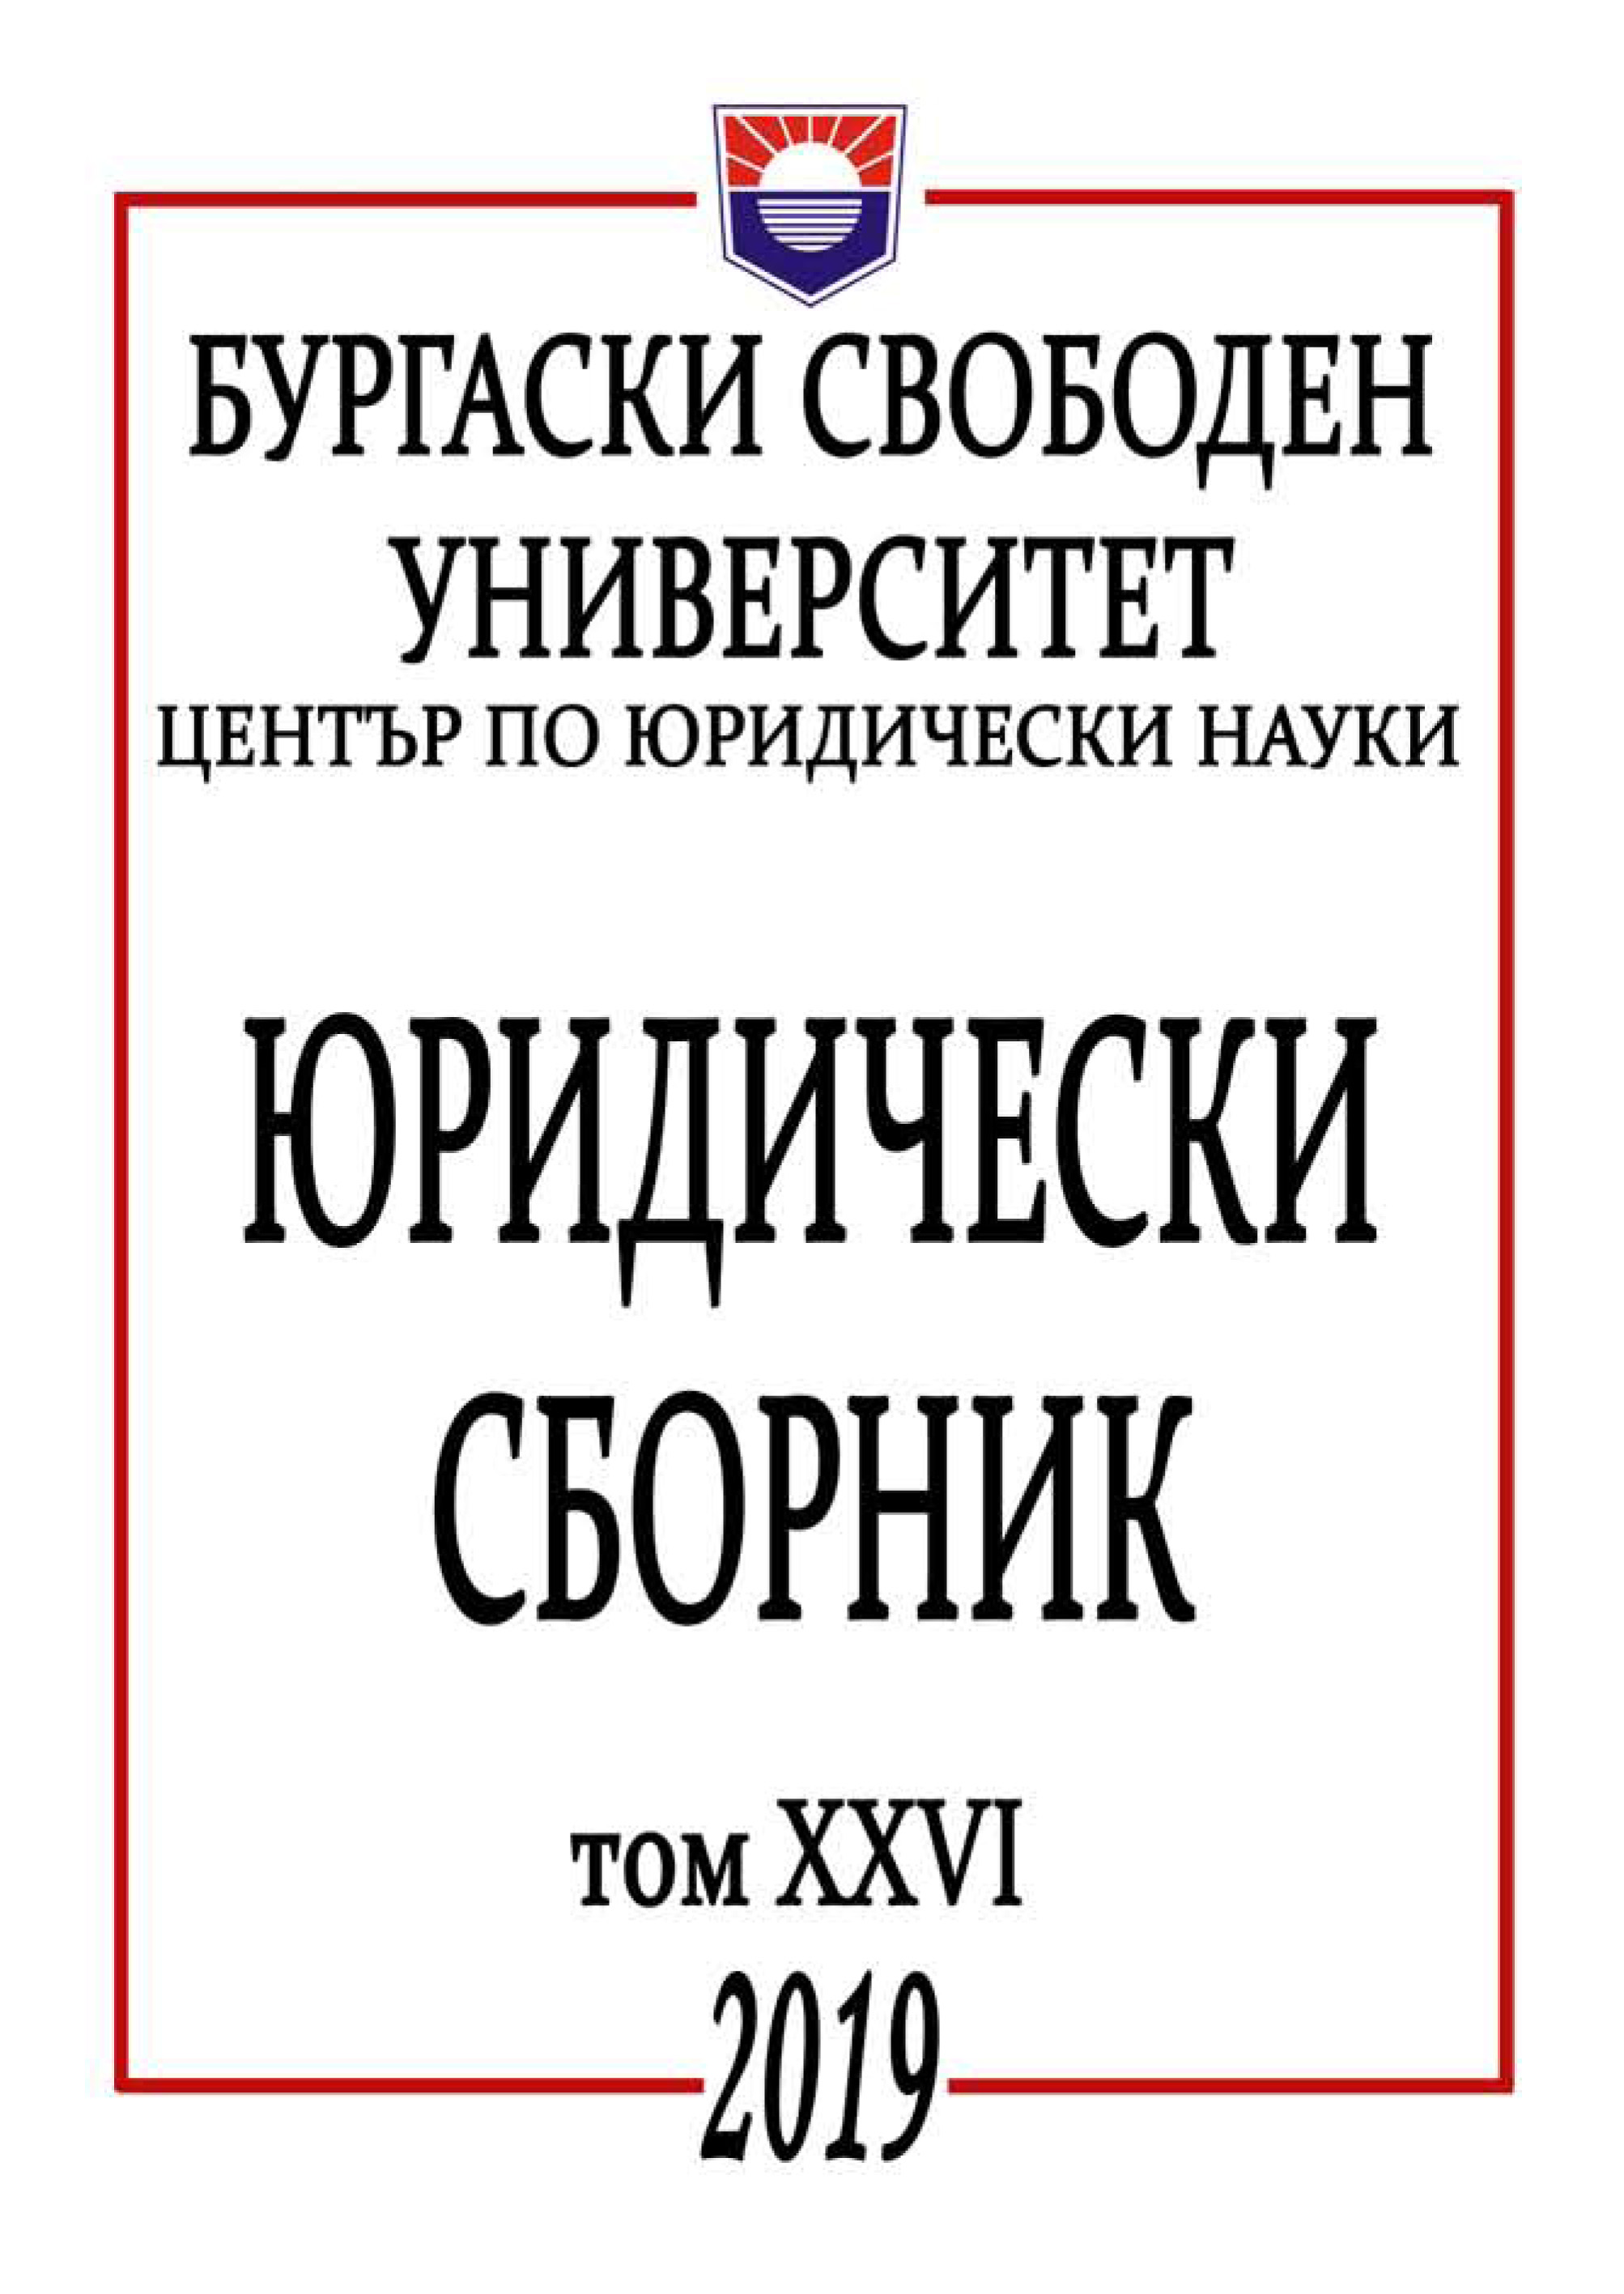 FUNCTIONAL COMPETENCE OF THE OFFICE FOR ADMINISTRATIVE CONTROL OF FOREIGNERS AGAINST THIRD-COUNTRY NATIONALS RESIDING IN THE REPUBLIC OF BULGARIA FOR THE PURPOSES OF EMPLOYMENT Cover Image